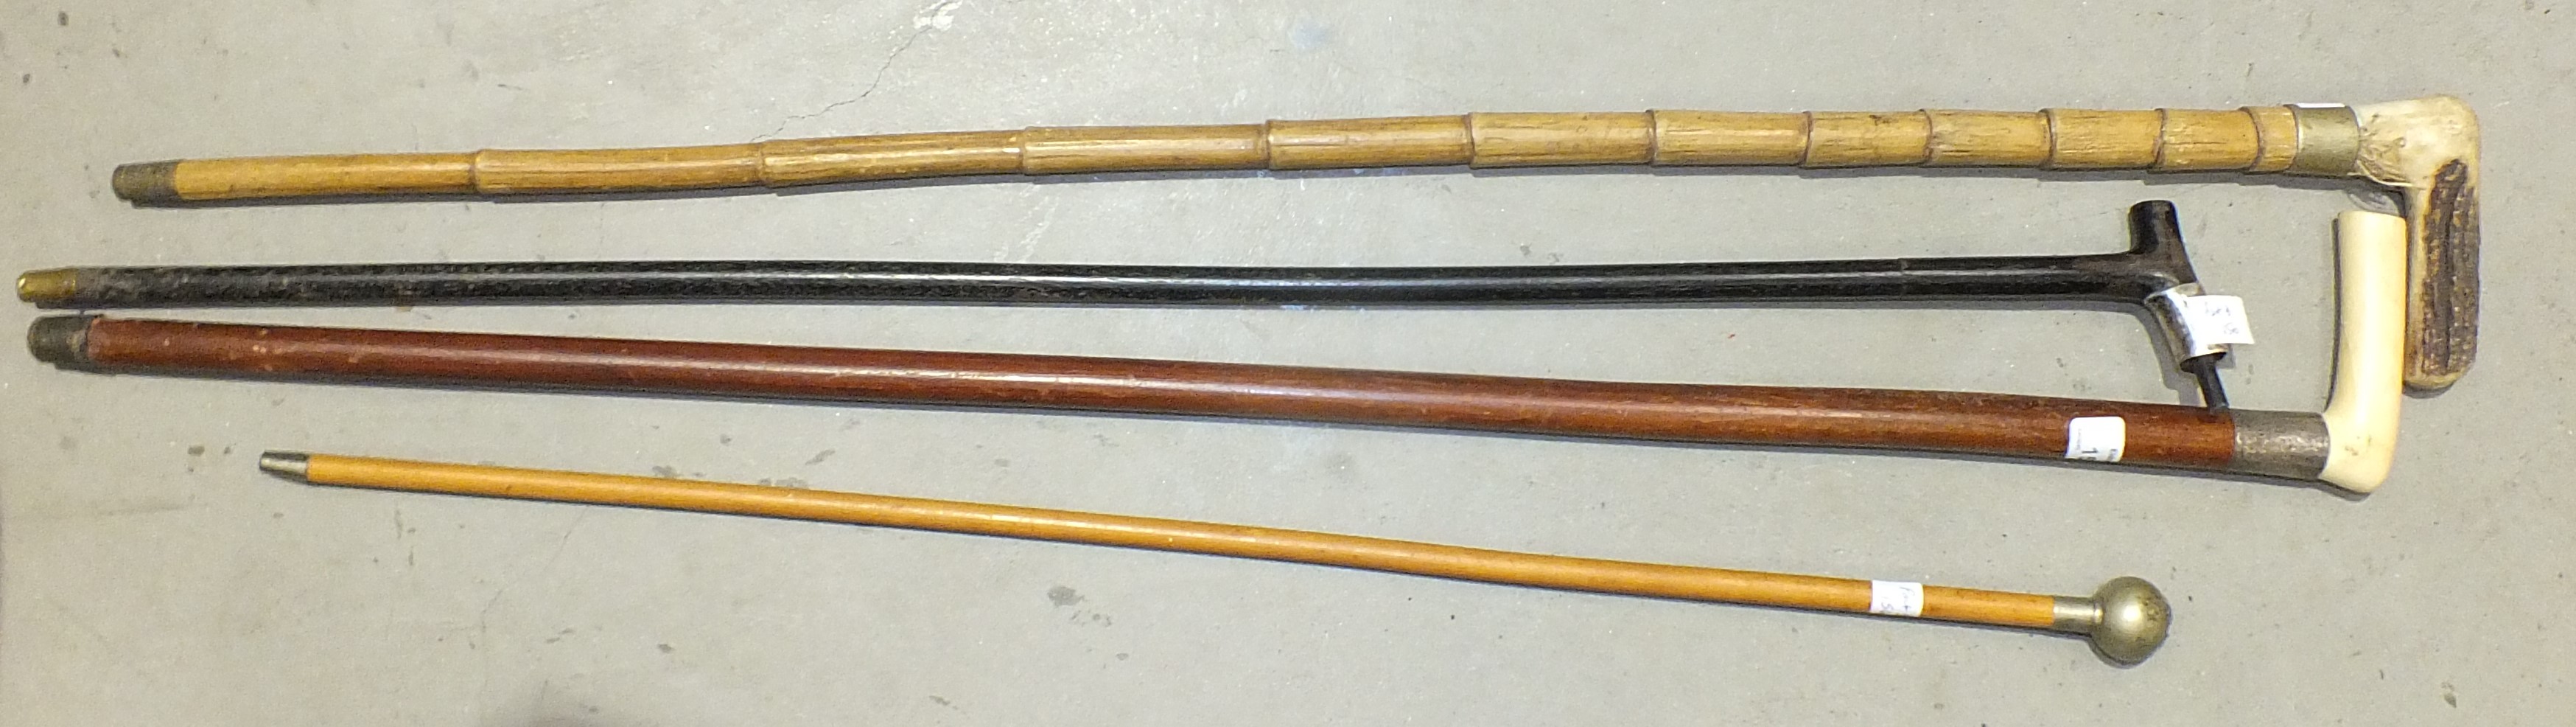 A silver-mounted ivory-handled walking cane, a police-issue drill cane, various metalware and - Image 2 of 2